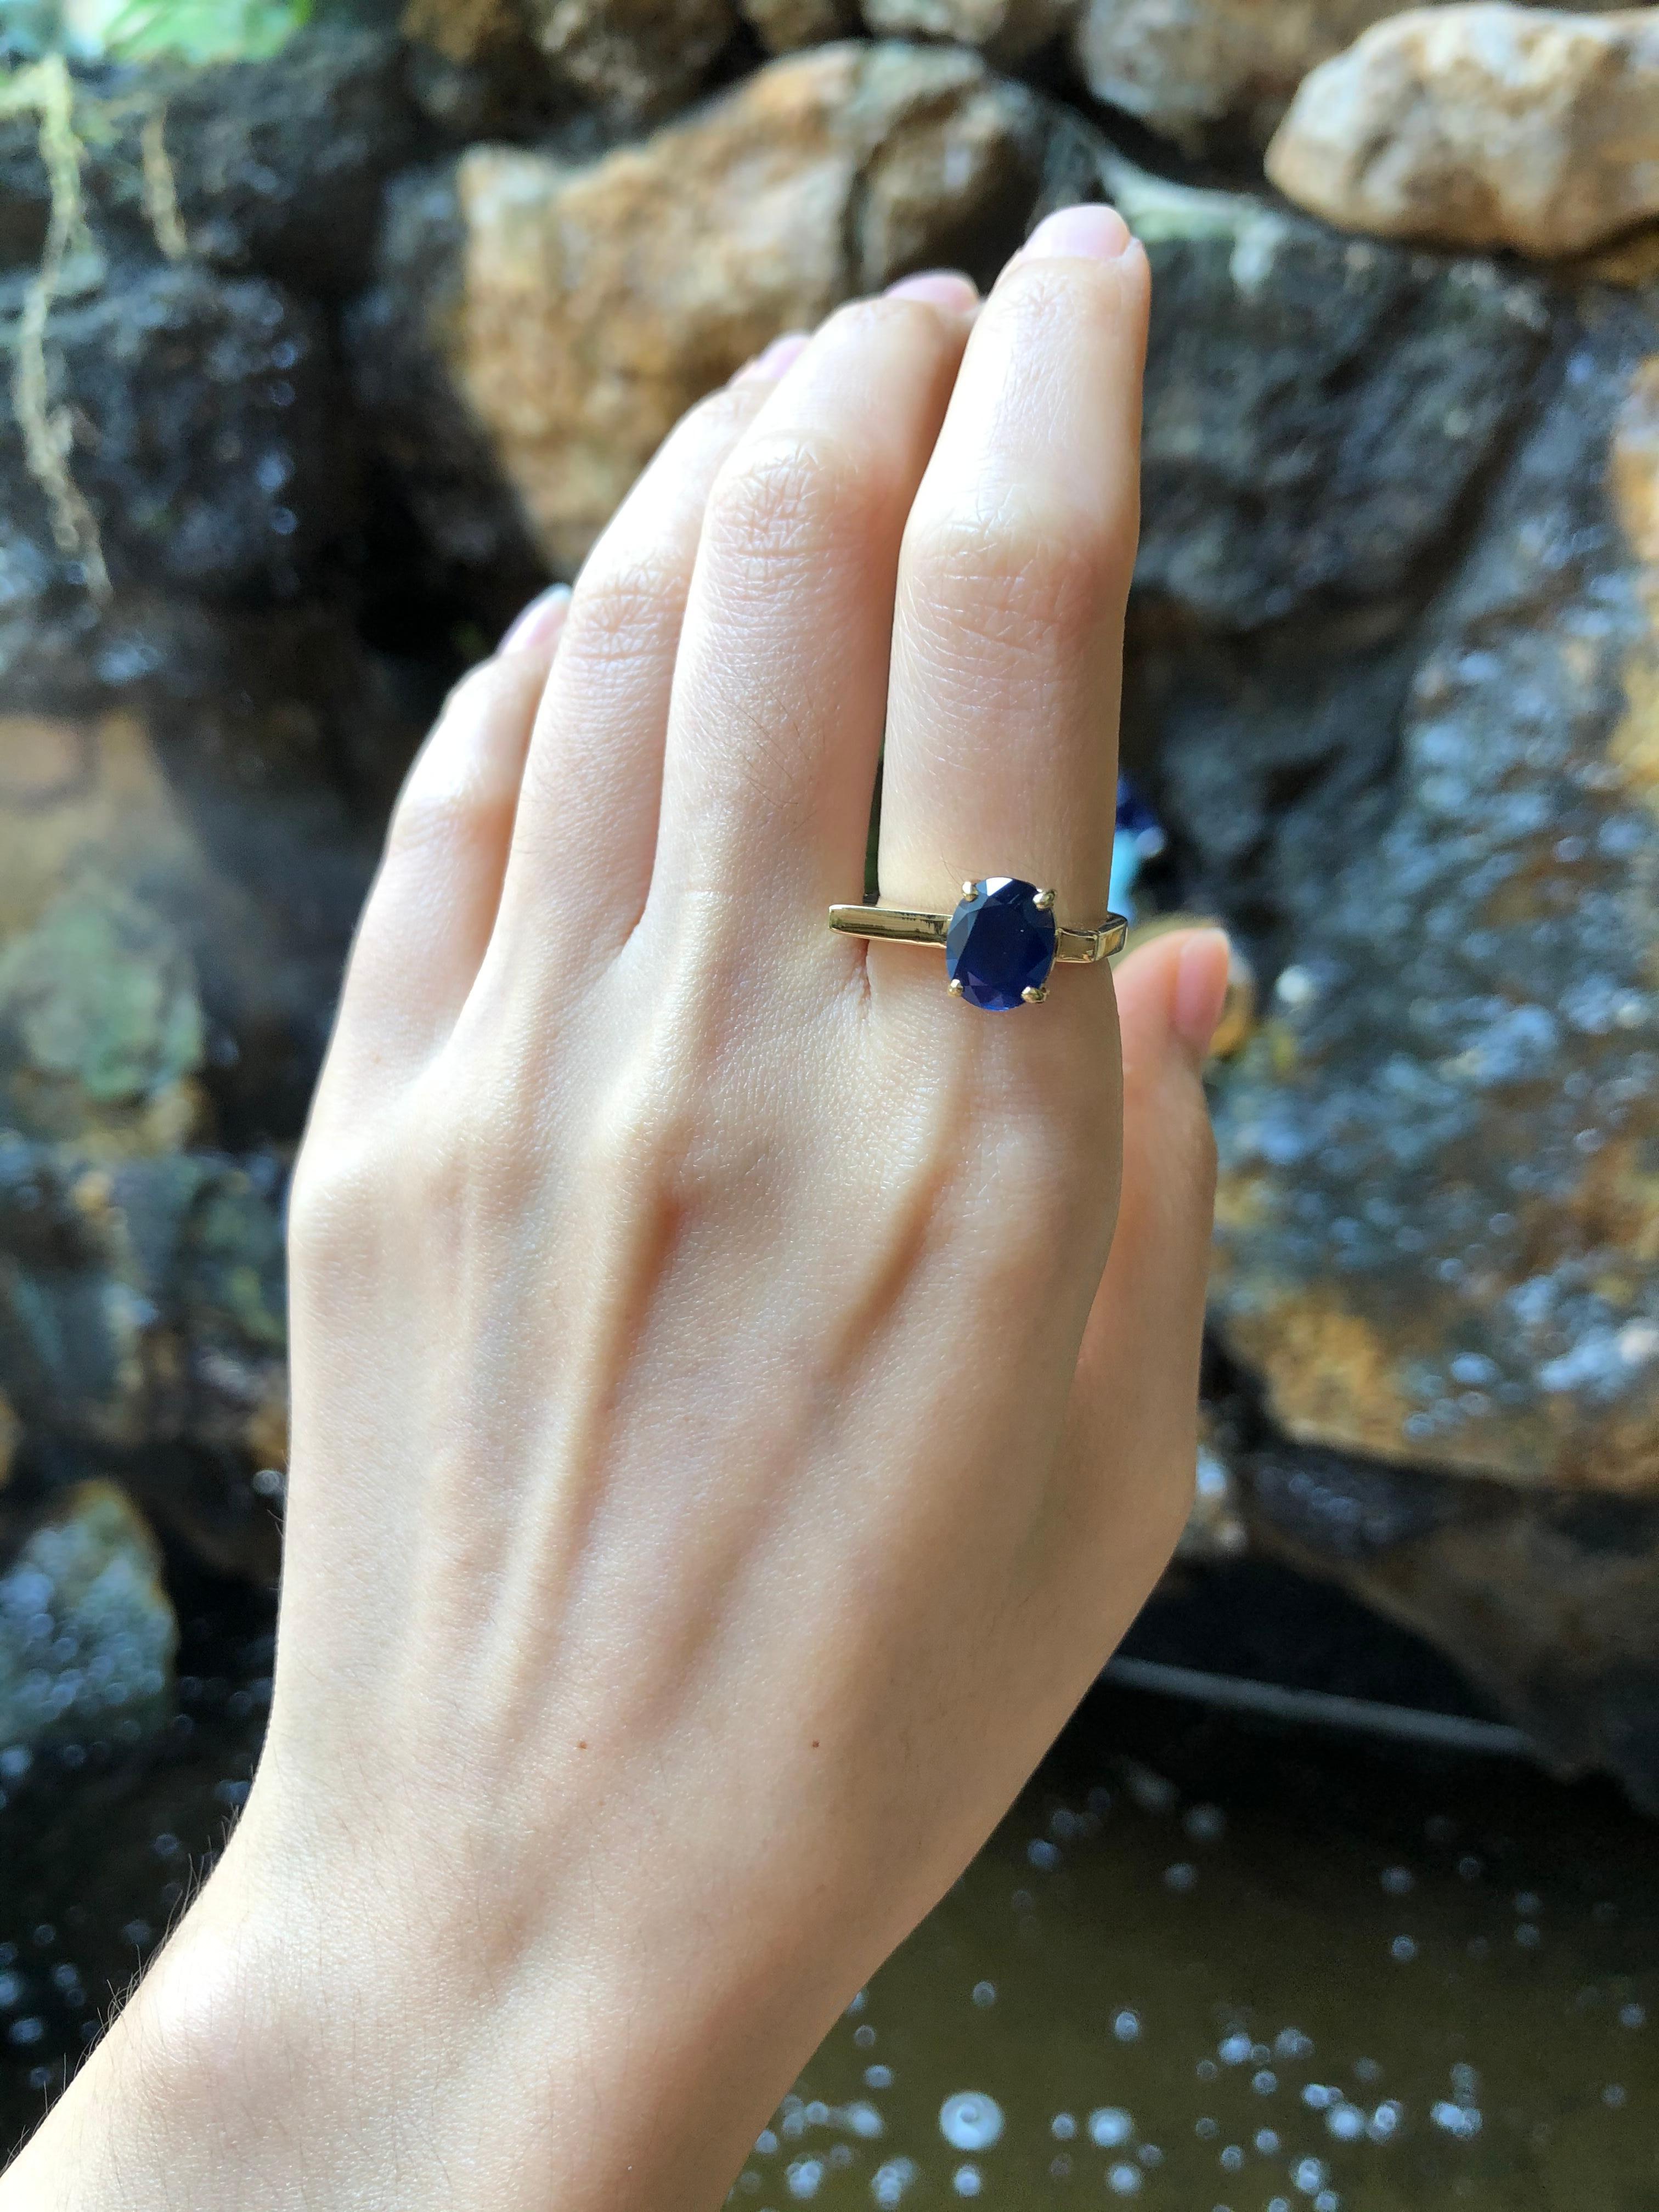 Blue Sapphire 3.35 carats Ring set in 18 Karat Gold Settings

Width:  0.7 cm 
Length: 0.9 cm
Ring Size: 53
Total Weight: 6.74 grams

